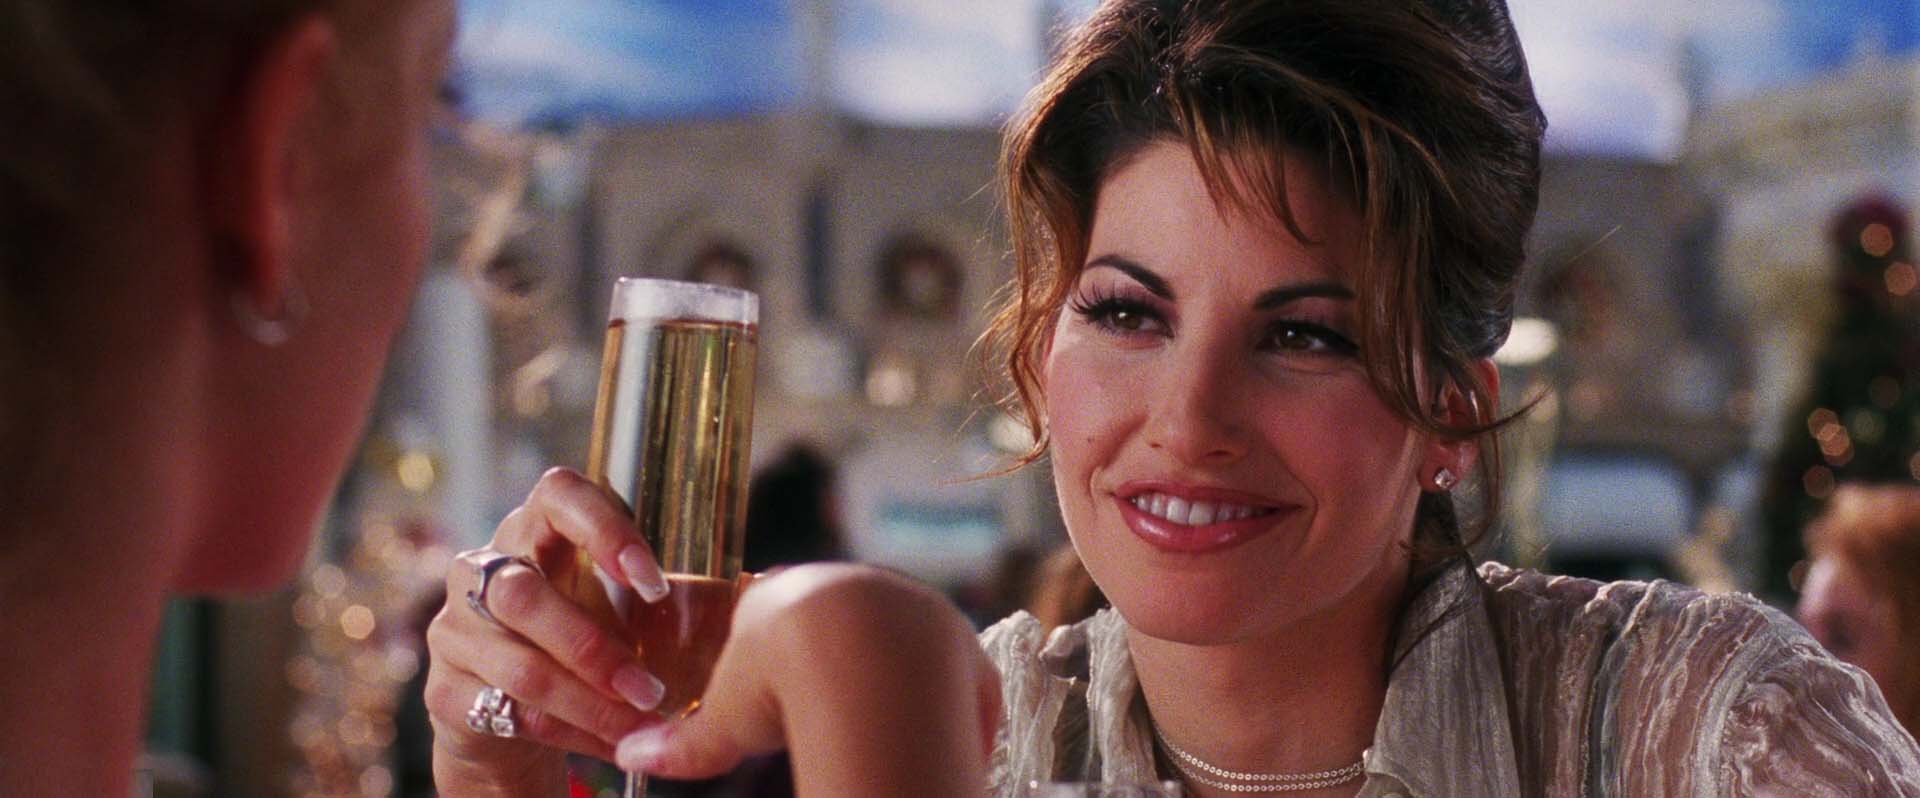 Happy birthday gina gershon the most important gemini in my life 